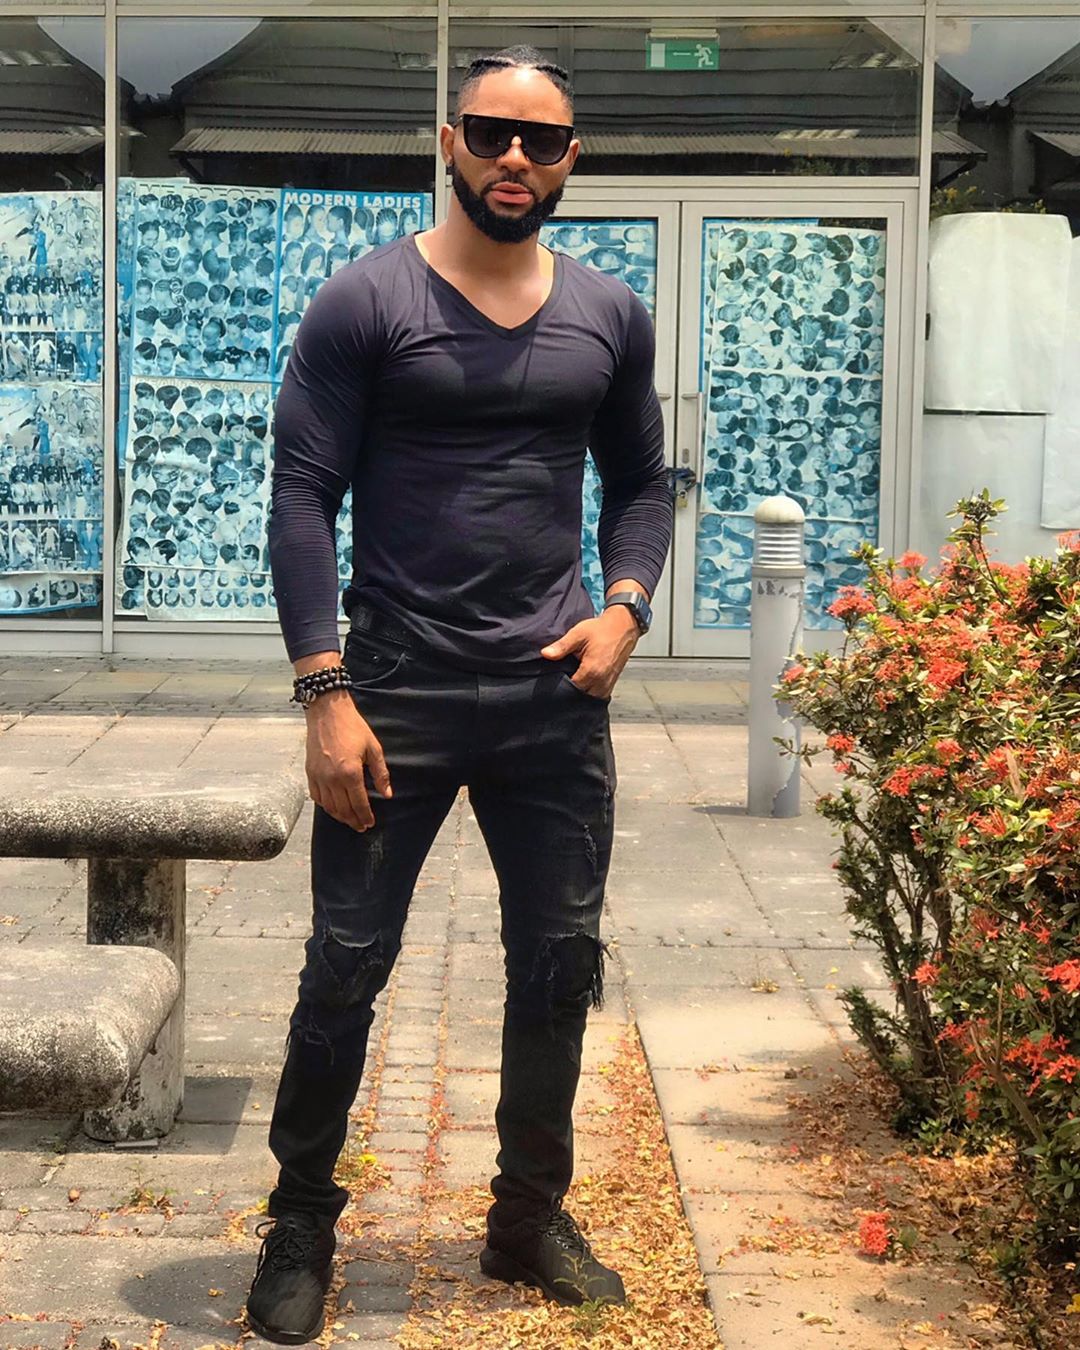 The Cross River State born upcoming Nigerian actor shared new photos of ...